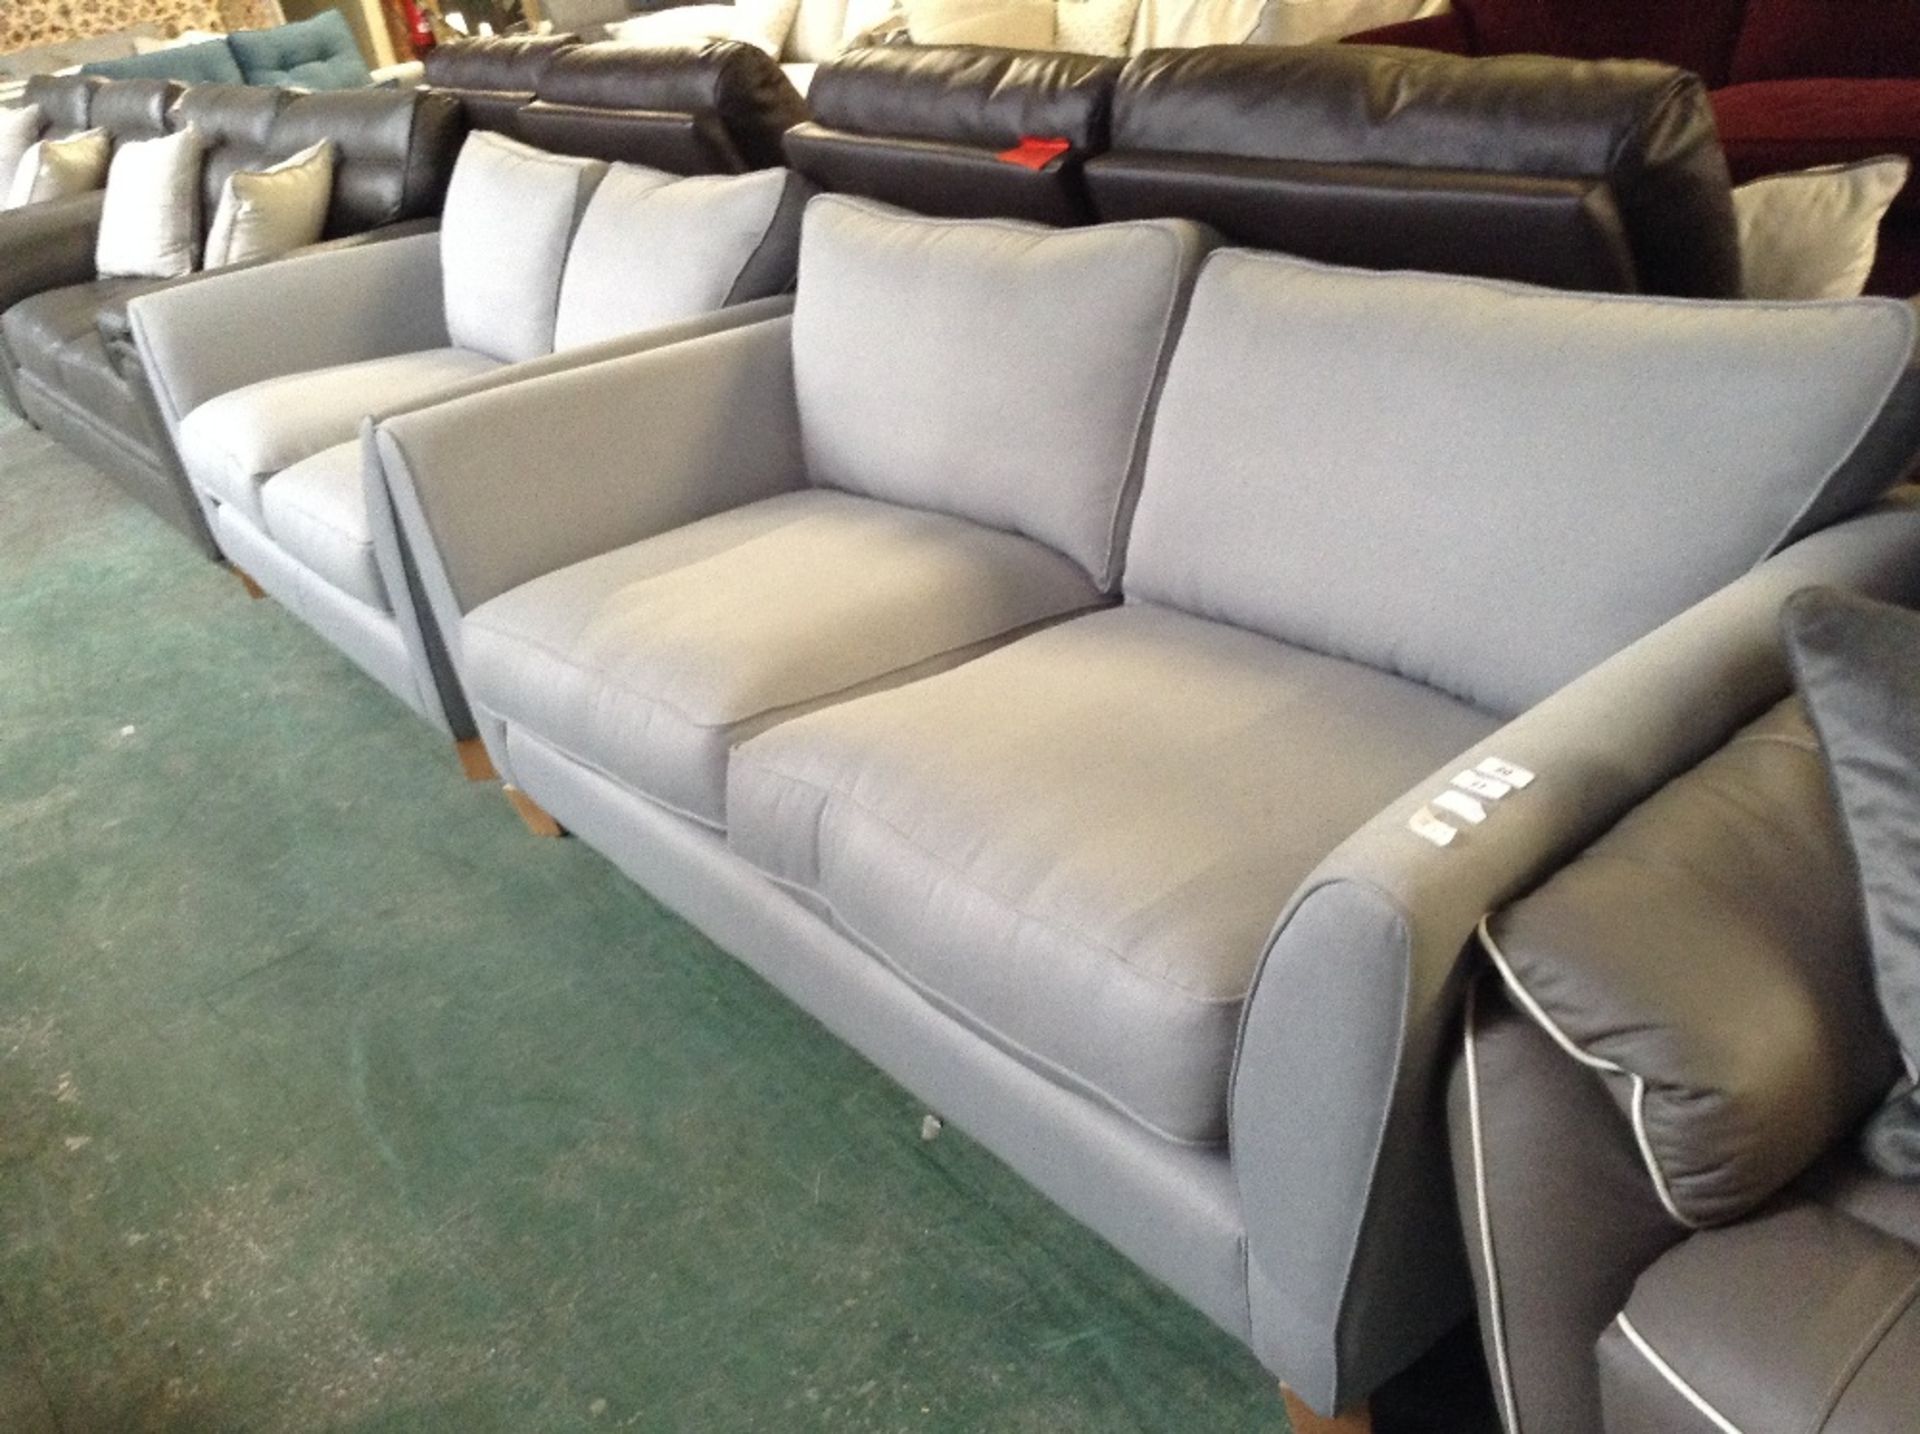 SKY BLUE 3 SEATER SOFA AND 2 SEATER SOFA (unwrapped)